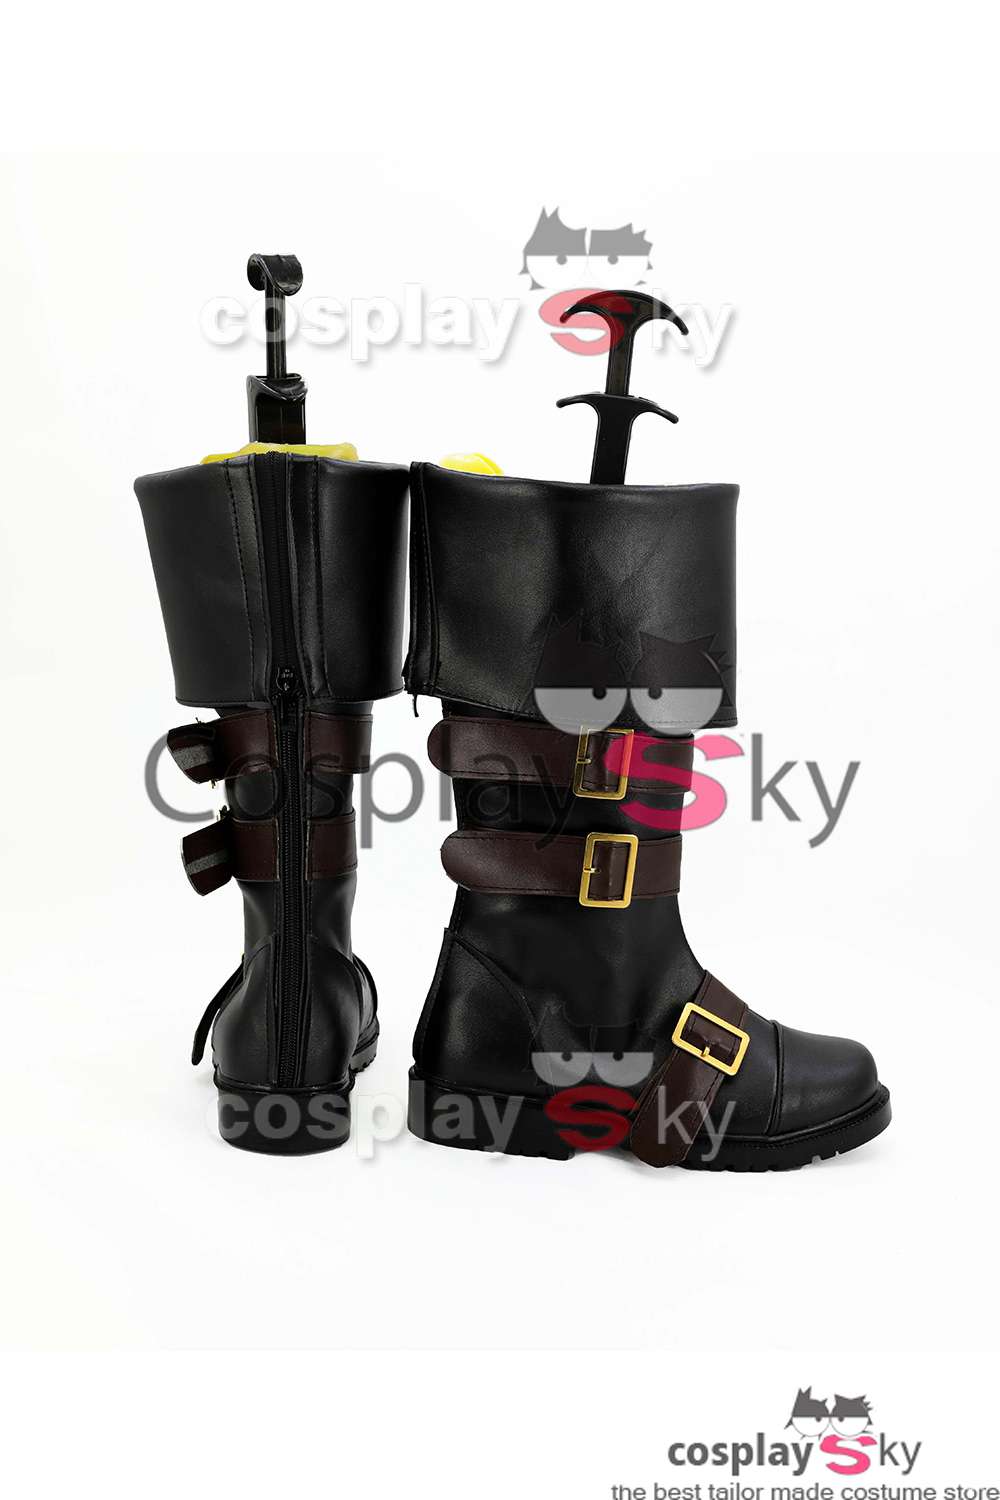 NieR/ Nier: Automata 9S Bottes Cosplay Chaussures